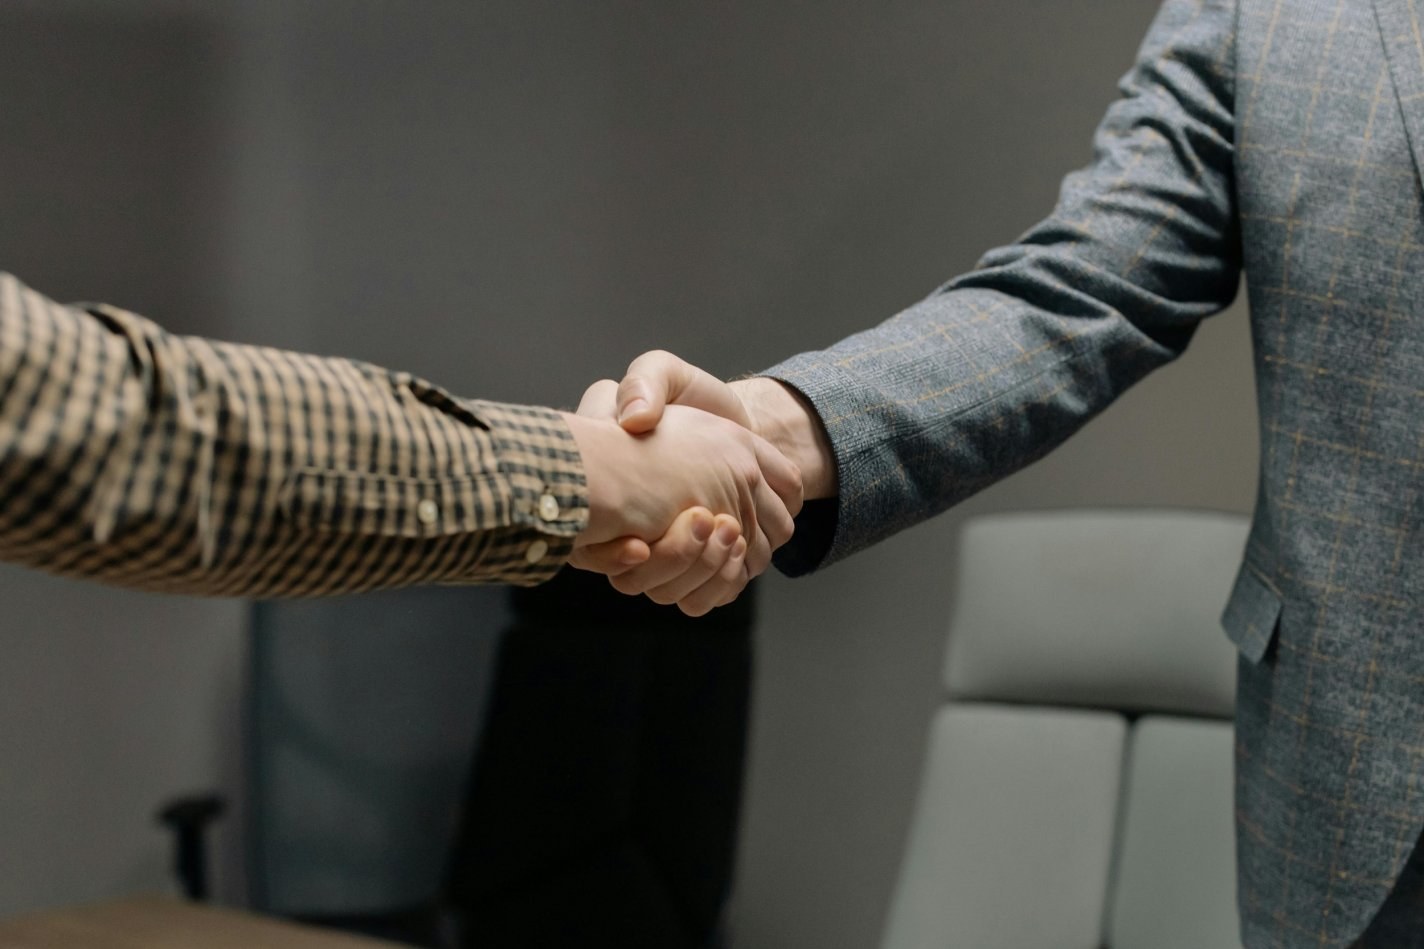 Two men shake hands in an office setting.